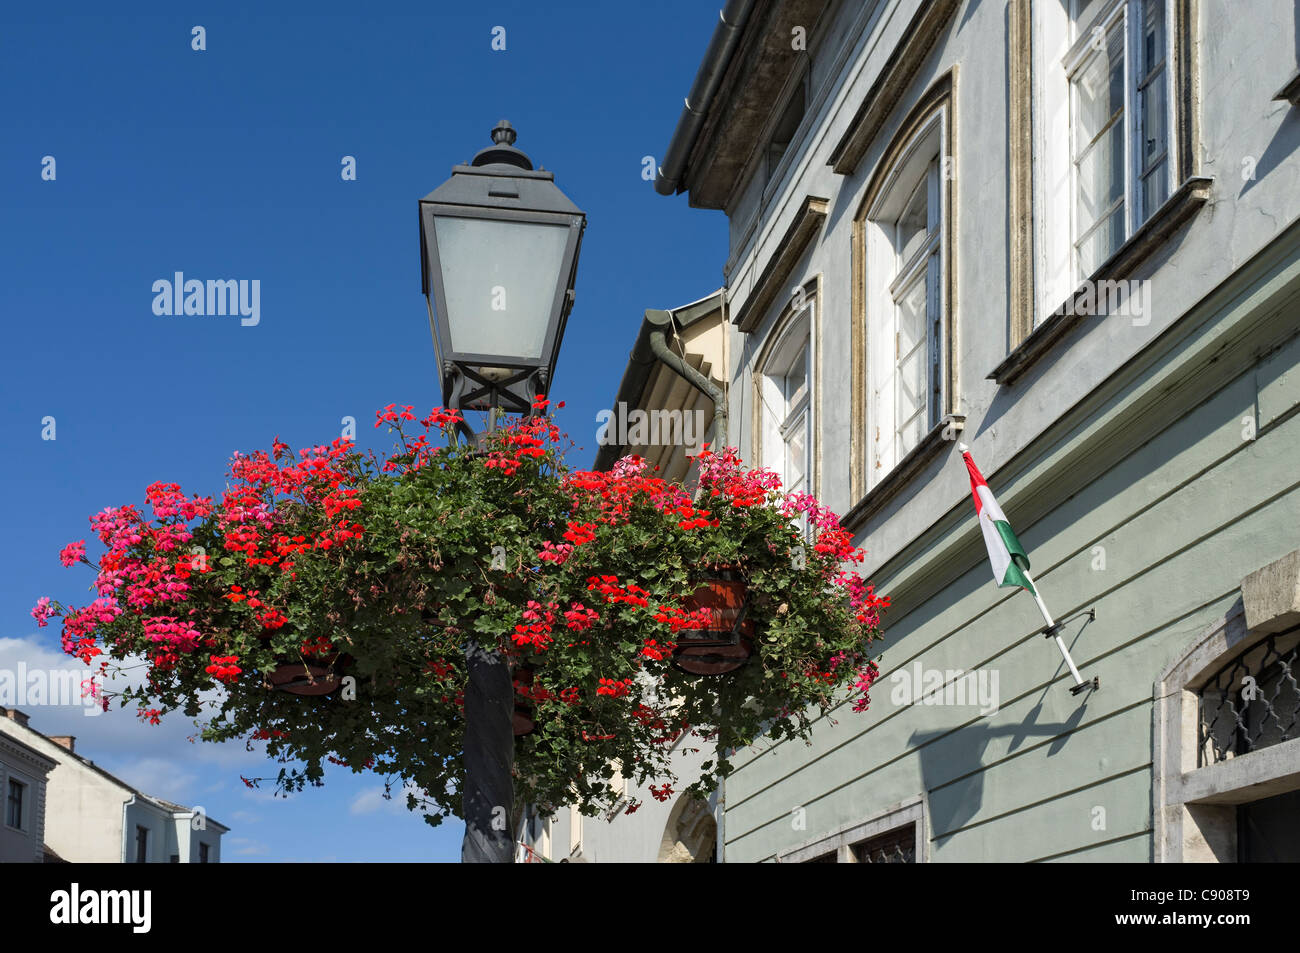 Floral decoration on lampost Stock Photo